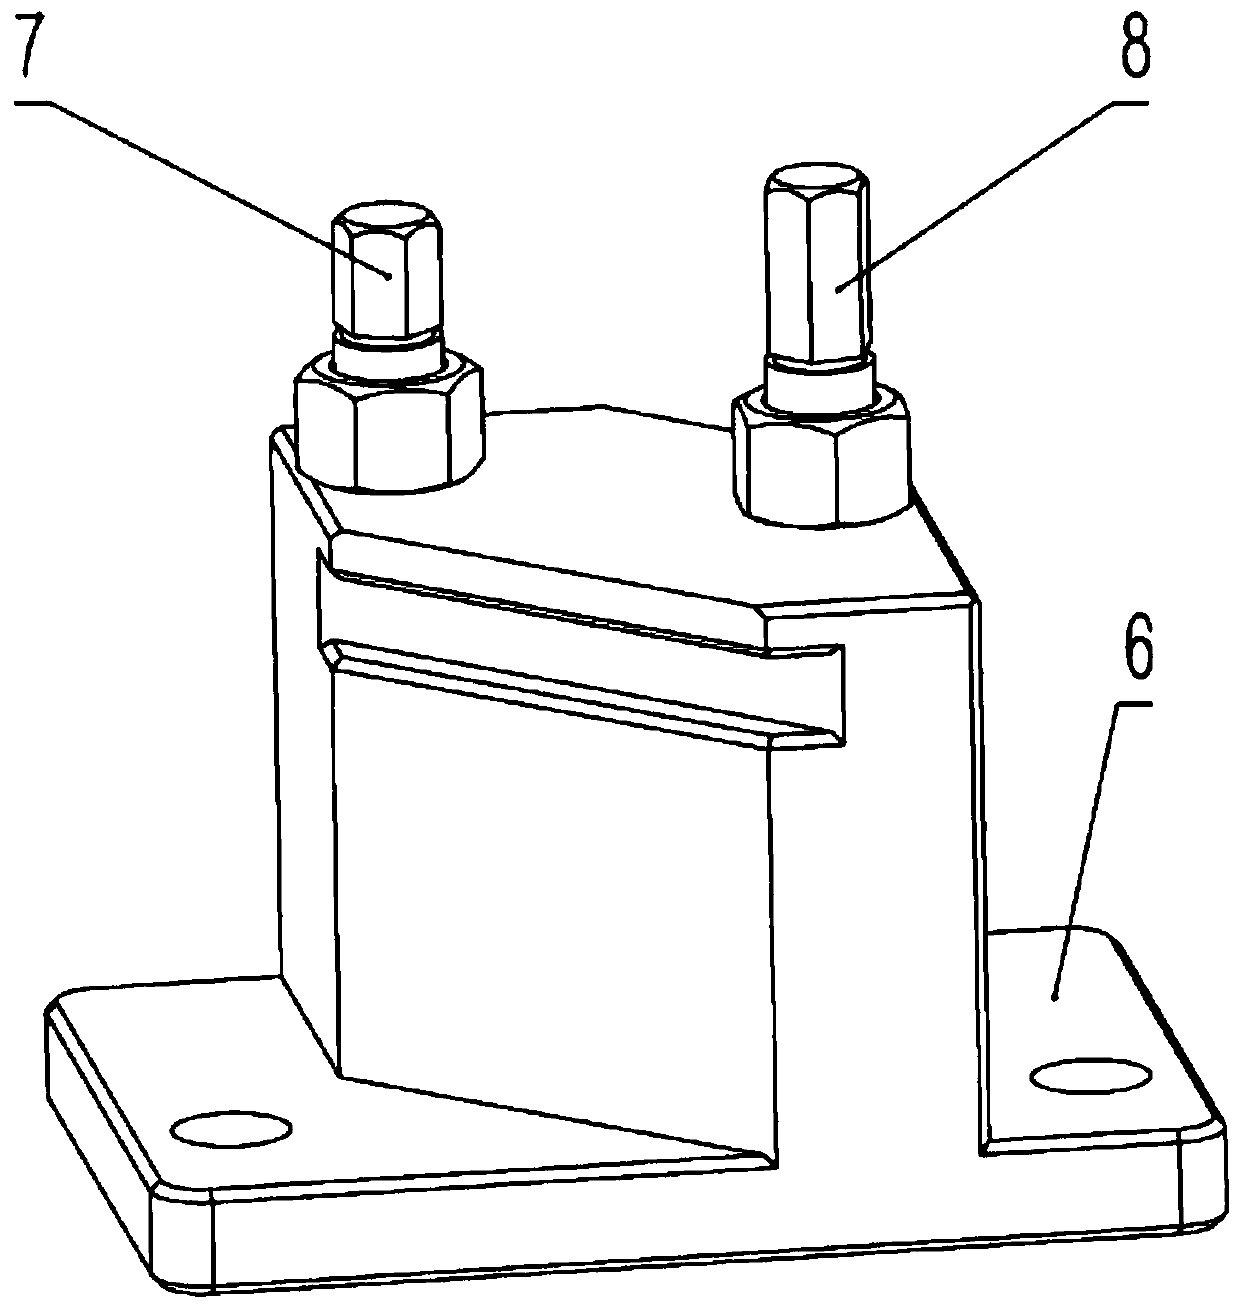 A positioning fixture and clamping method for titanium alloy ring castings